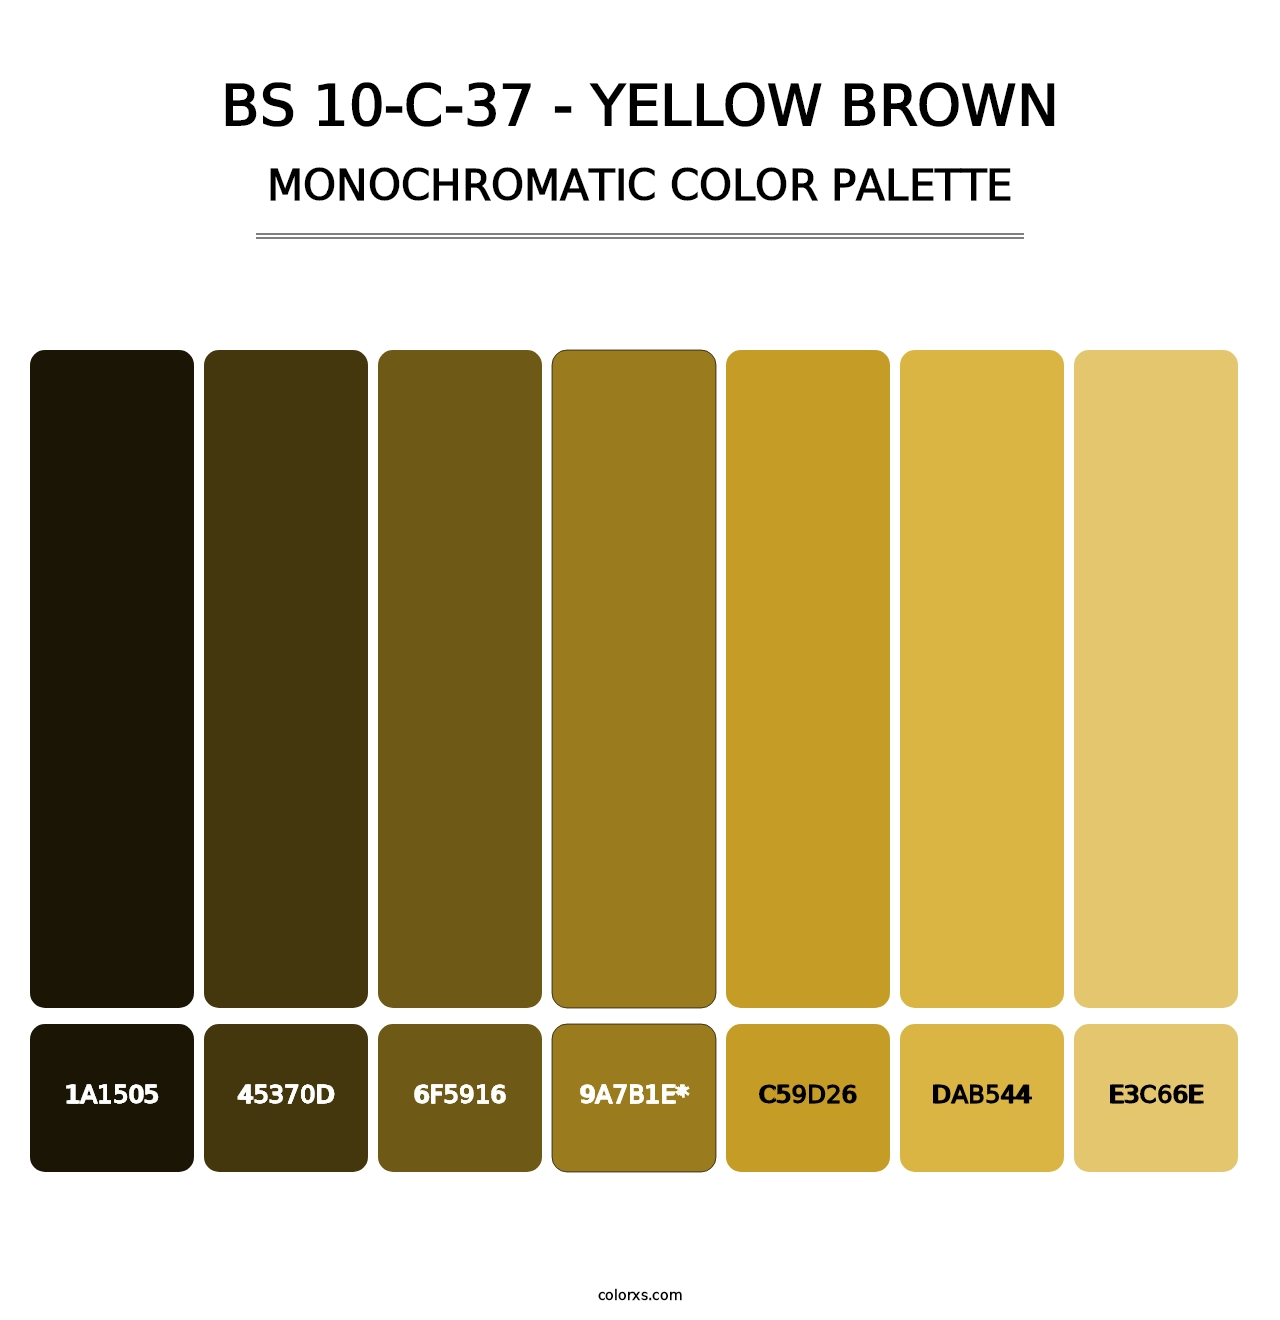 BS 10-C-37 - Yellow Brown - Monochromatic Color Palette